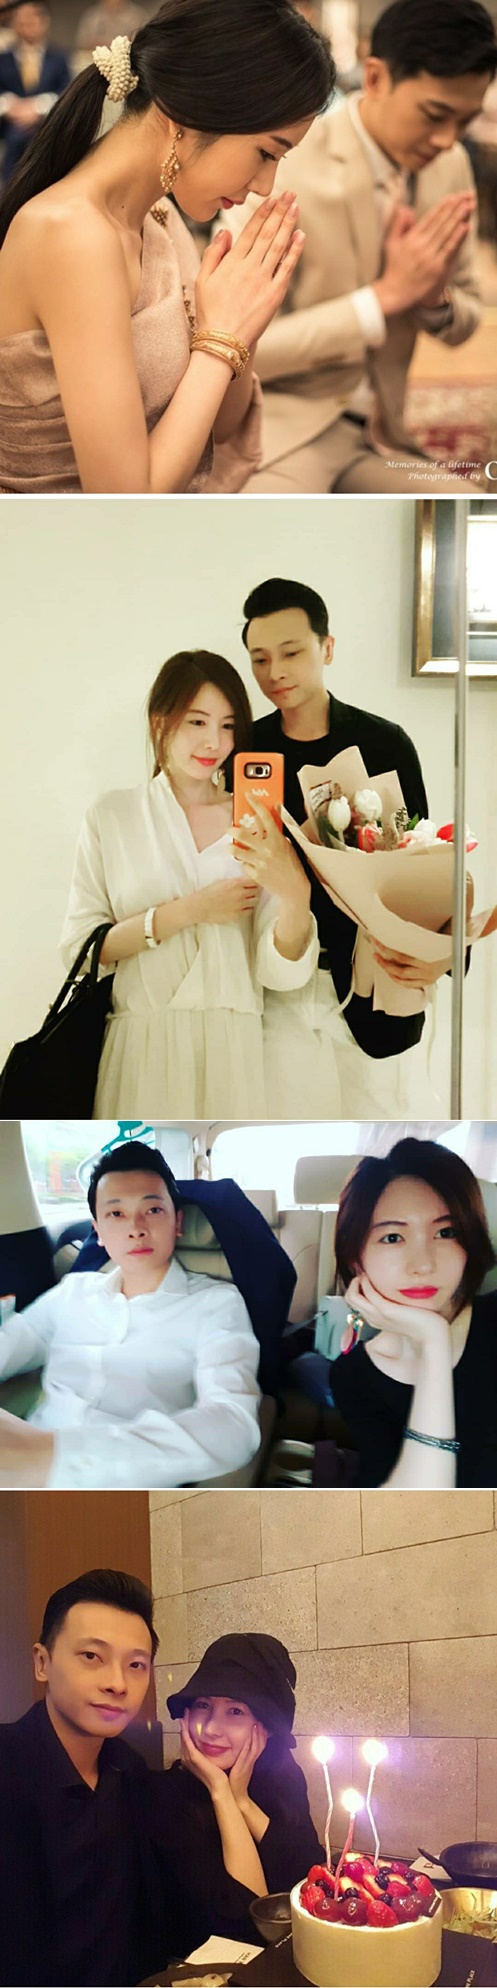 Actor Shin Joo-ah flaunted the look of her ThailandConglomerate husbandIn MBC Everlon Video Star broadcast on the 22nd, Gan Mi Yeon Shin Joo-ah Park Eun Ji Lee Hye-joo appeared as Marriage Inducing Special.Shin Joo-ah is married to a paint company representative who earns 40 billion won in annual sales at Thailand and currently lives in Bangkok.Shin Joo-ah said, I feel like I have mixed Joo Won and Park Seo-joon on my husbands appearance, he said. I do not see the face of the ex-boyfriend and my friends talked about the Internet.Shin Joo-ah said, My husband has no cheapness. I love him, so he is good to me.I do it to others and I am good at it because I am good at it. I am good at it, so I do not worry about it. Shin Joo-ahs husband Sarauth Rachanakun is a Chinese-Thailand and is the head of the Thailand paint company JBP.His company is famous enough to be introduced to local media, including achieving sales of 40 billion won in 2008.MBC Everlon Video Star on the 22nd